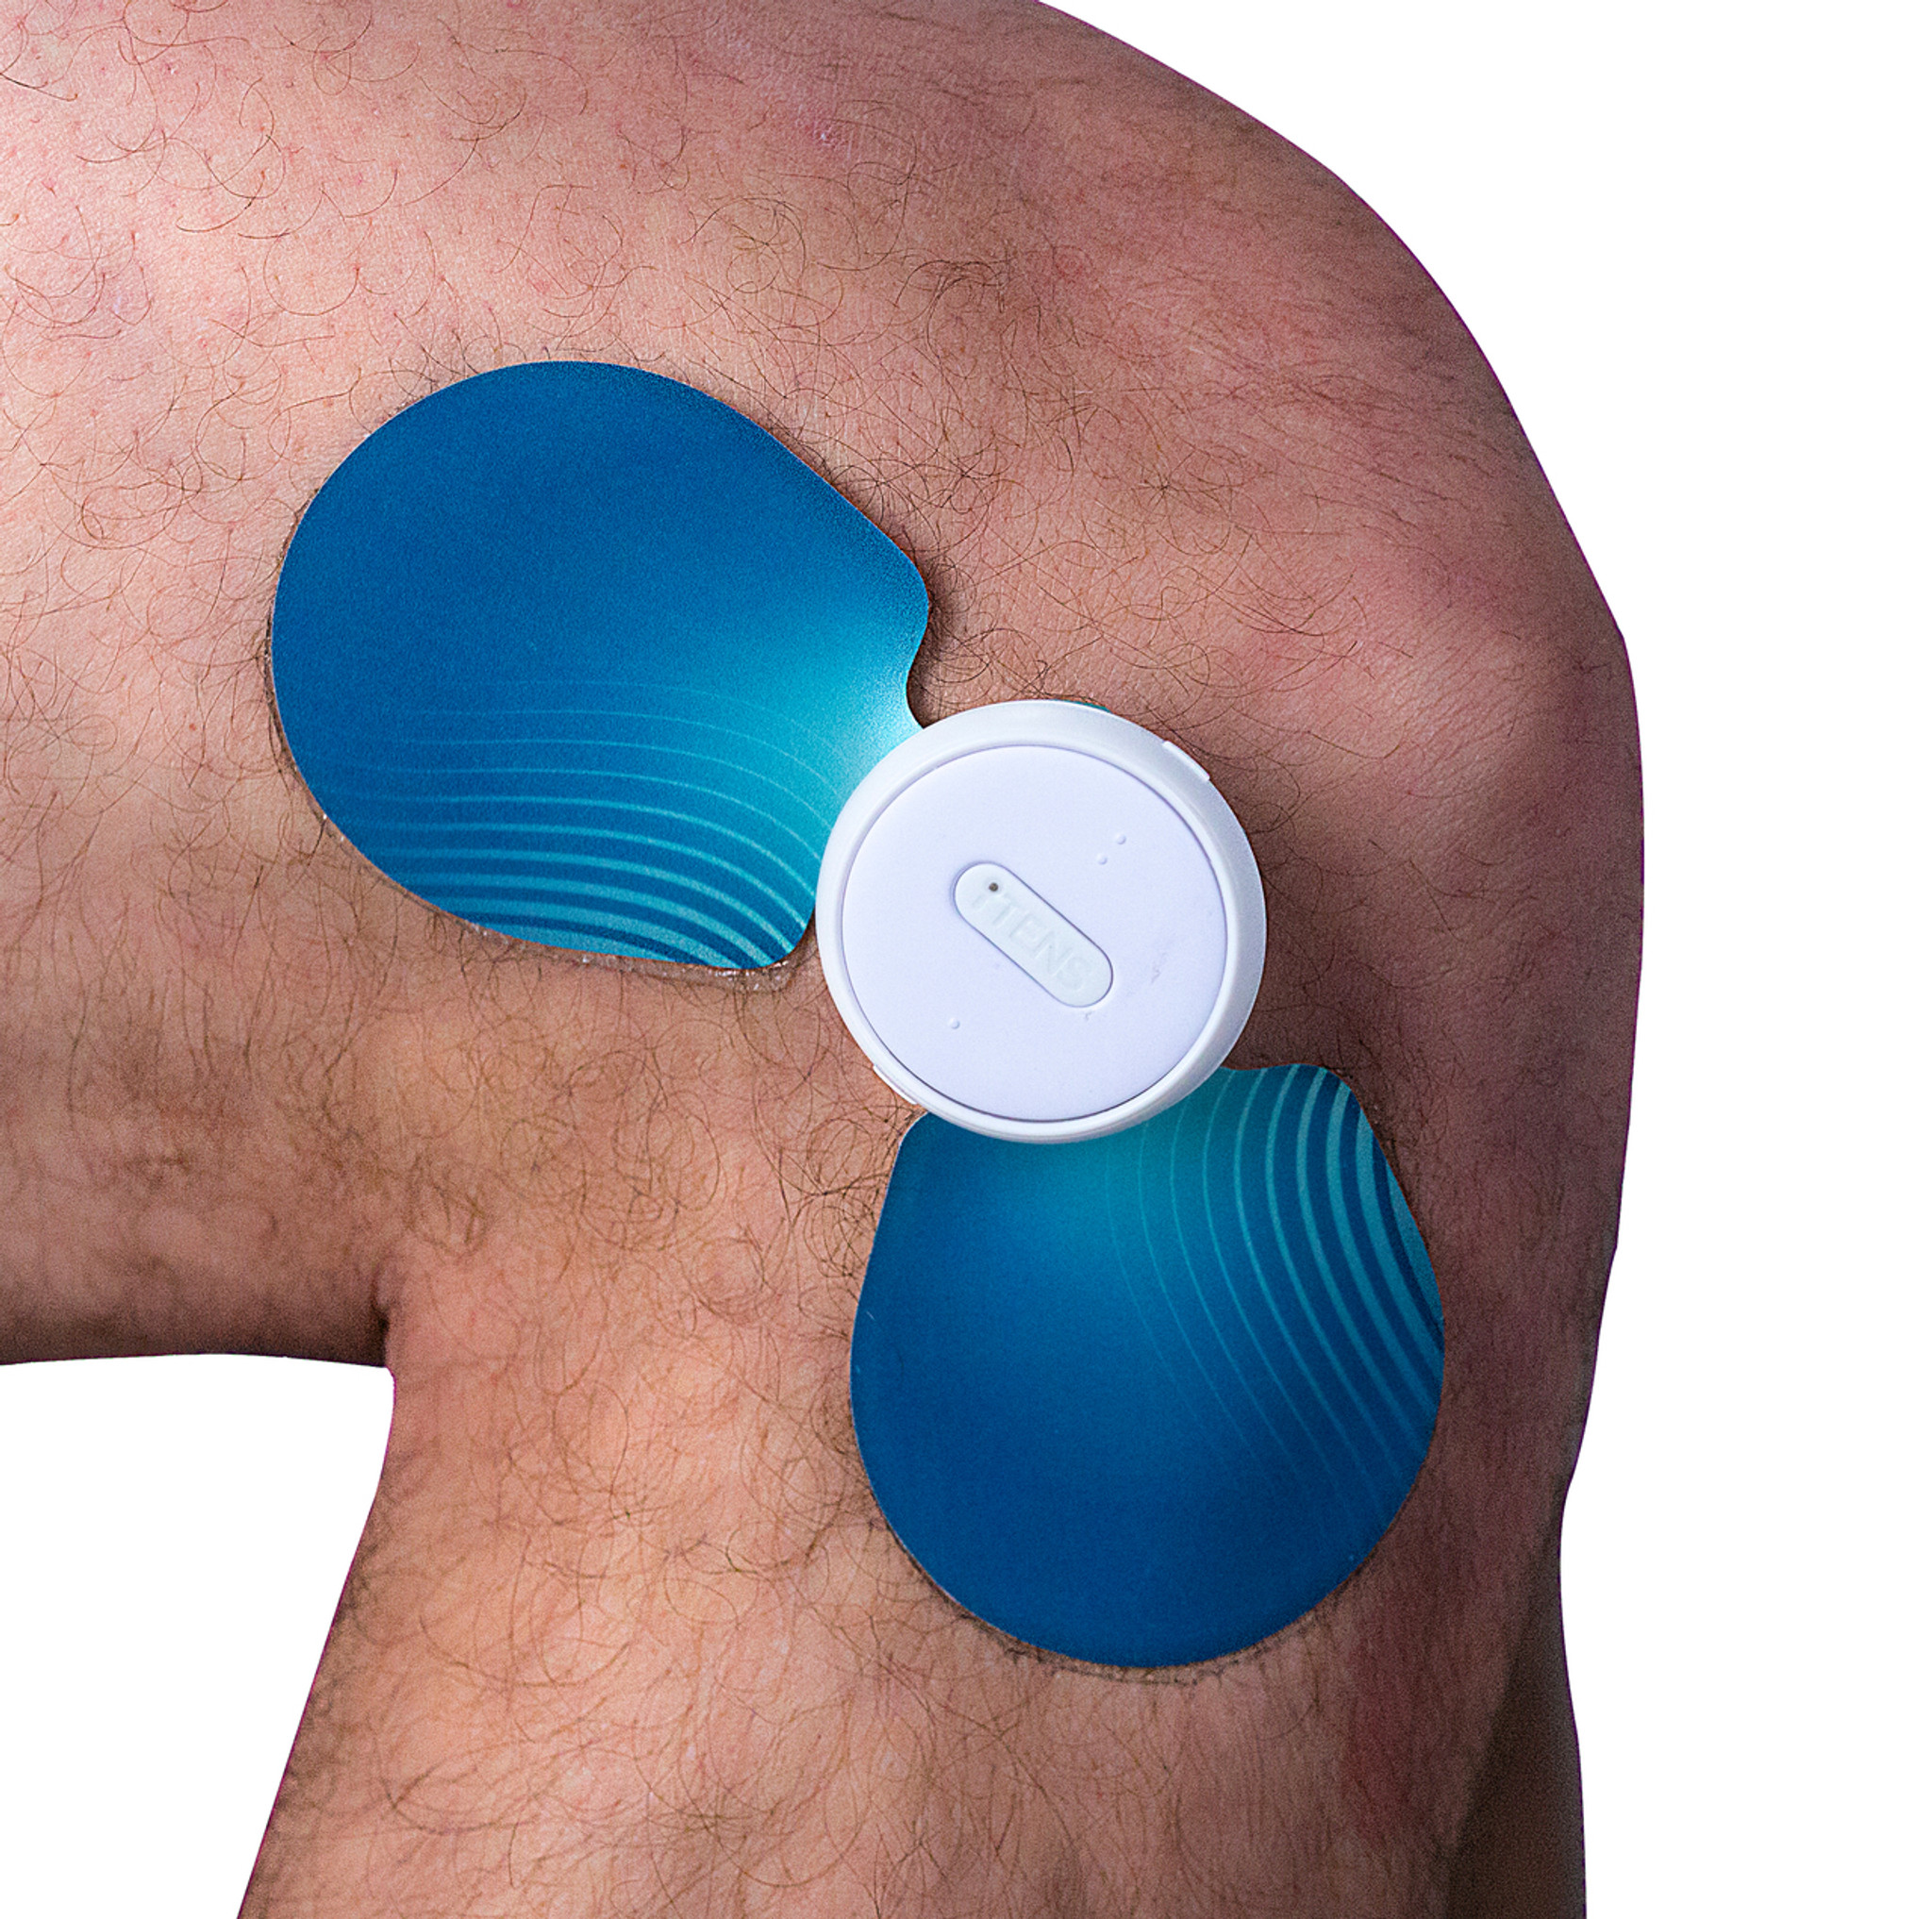 Wireless TENS Unit Stimulator by iTENS – Bluetooth Enabled TENS Device with  Free App, for Back Pain, Knee Pain, and Other Joint Relief. Rechargeable